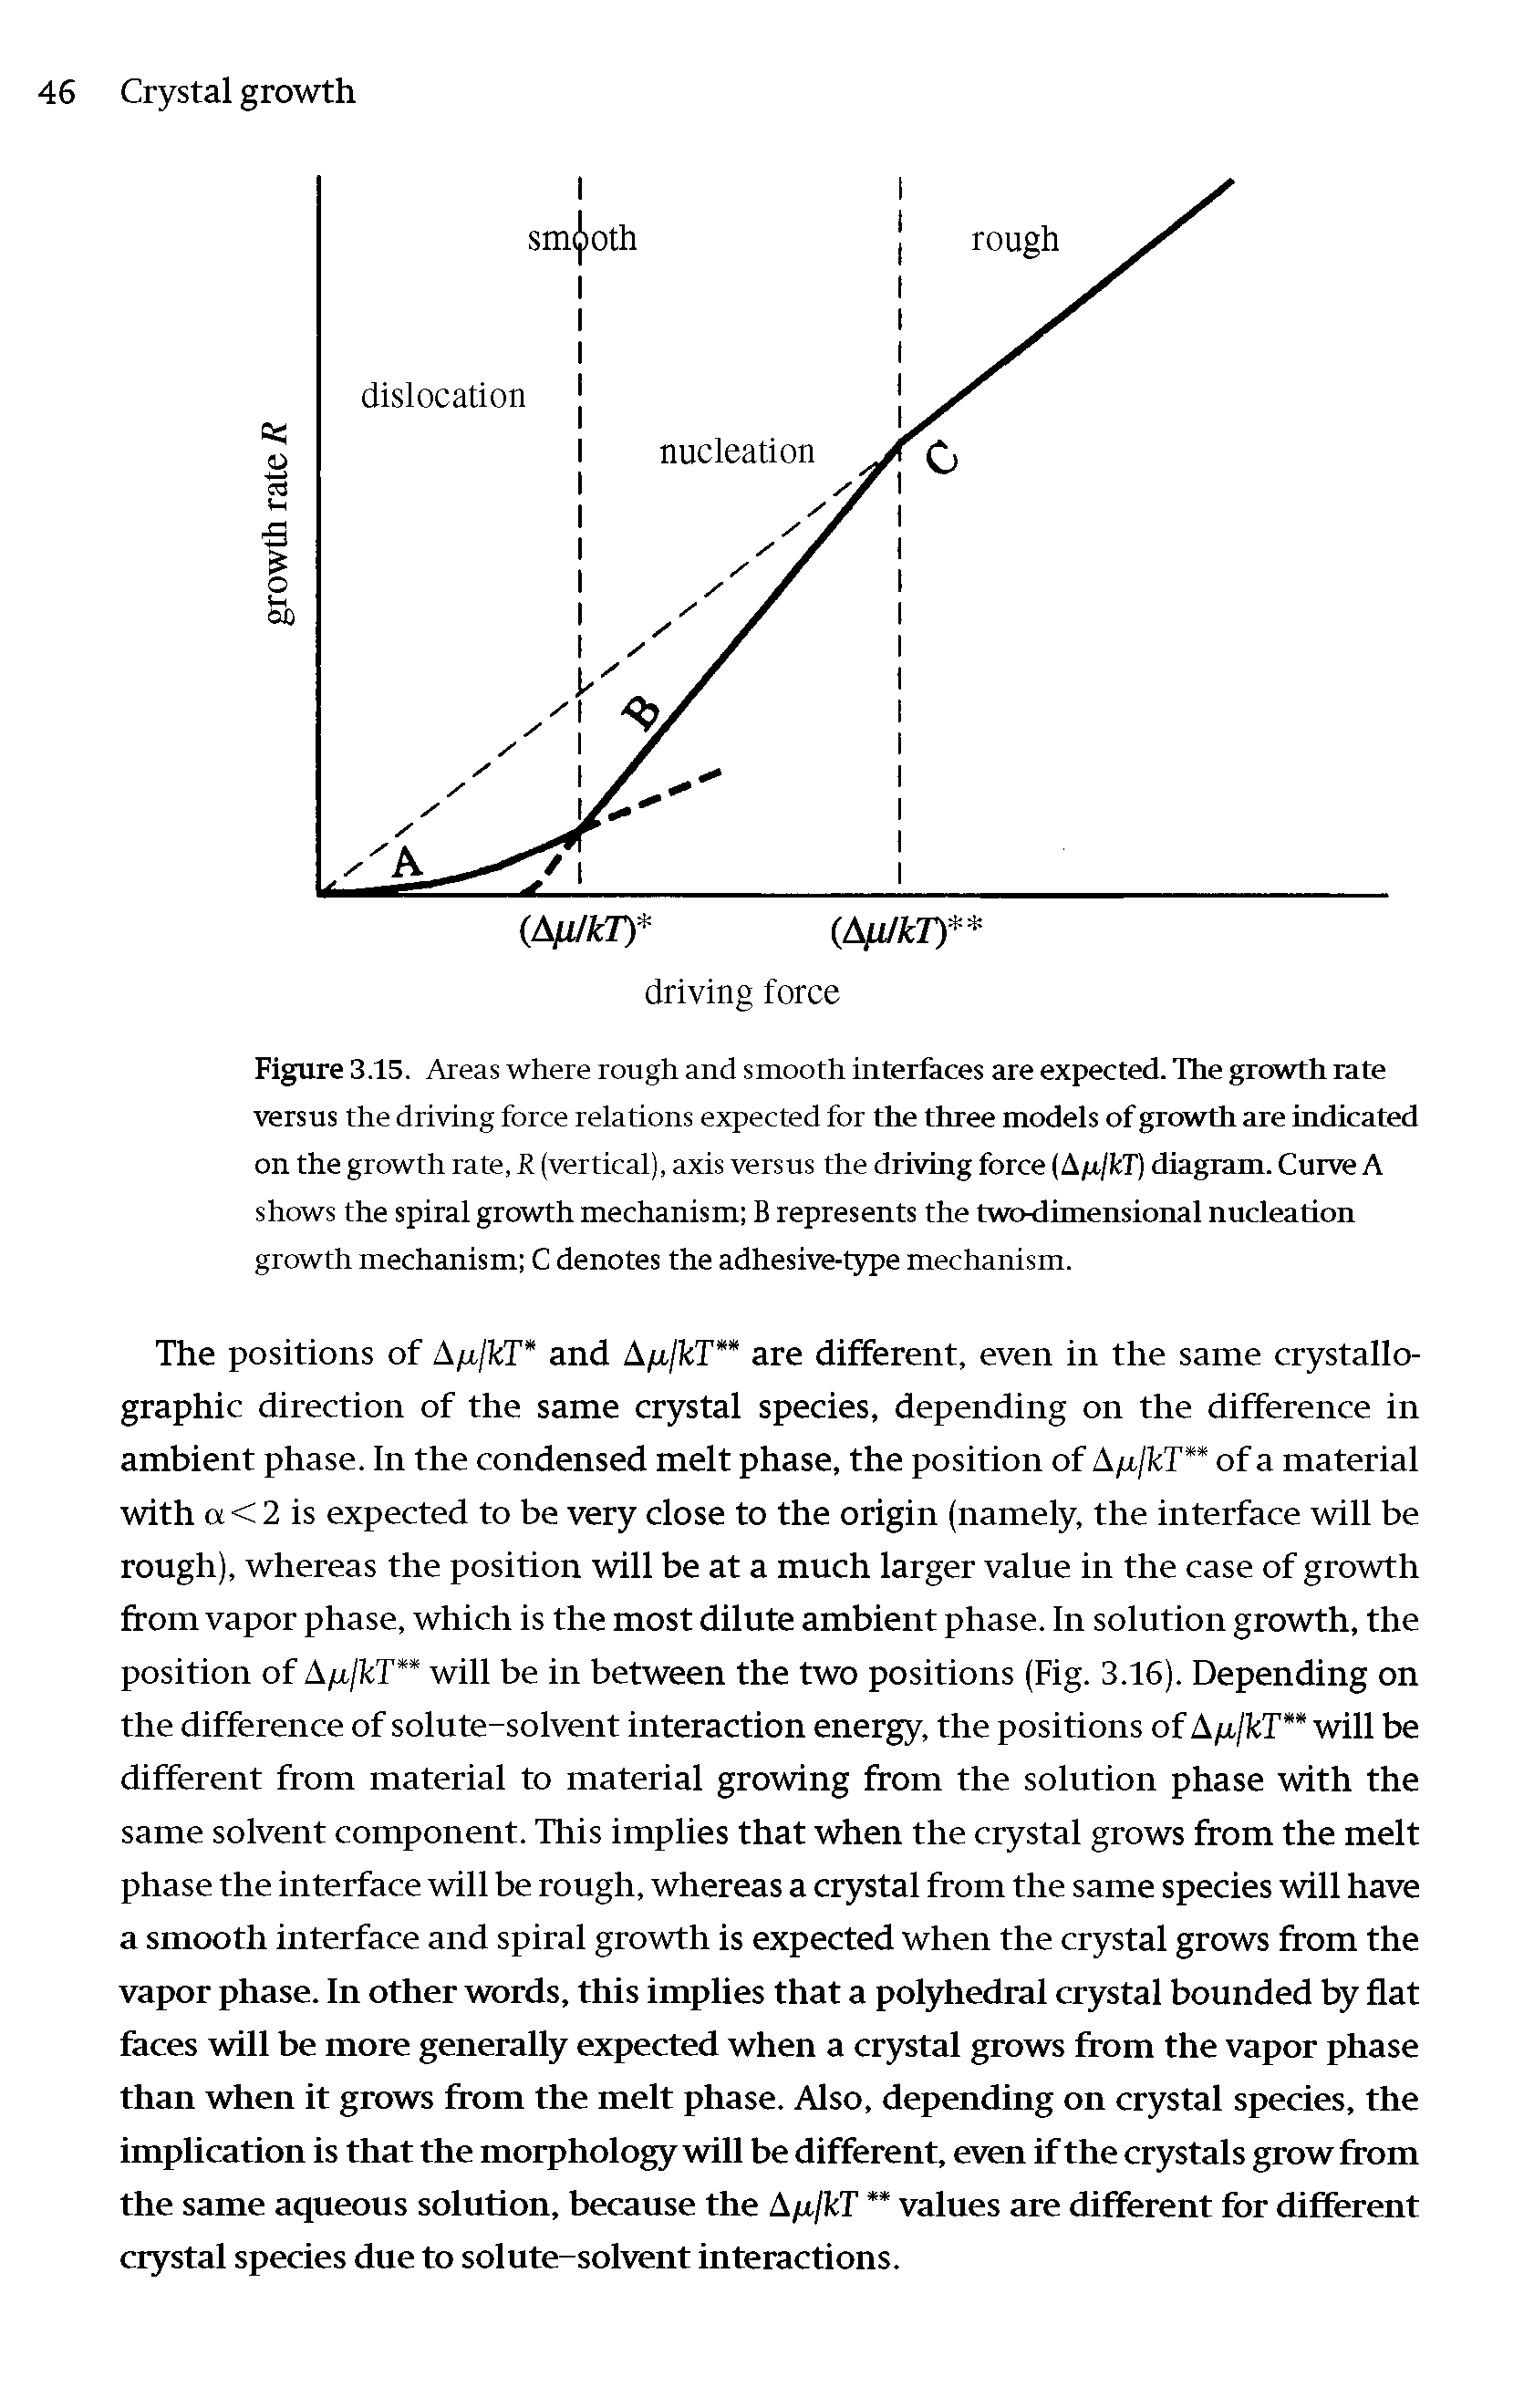 Figure 3.15. Areas where rough and smooth interfaces are expected. The growth rate versus the driving force relations expected for the three models of growth are indicated on the growth rate, R (vertical), axis versus the driving force (A/x/kT) diagram. Curve A shows the spiral growth mechanism B represents the two-dimensional nucleation growth mechanism C denotes the adhesive-type mechanism.